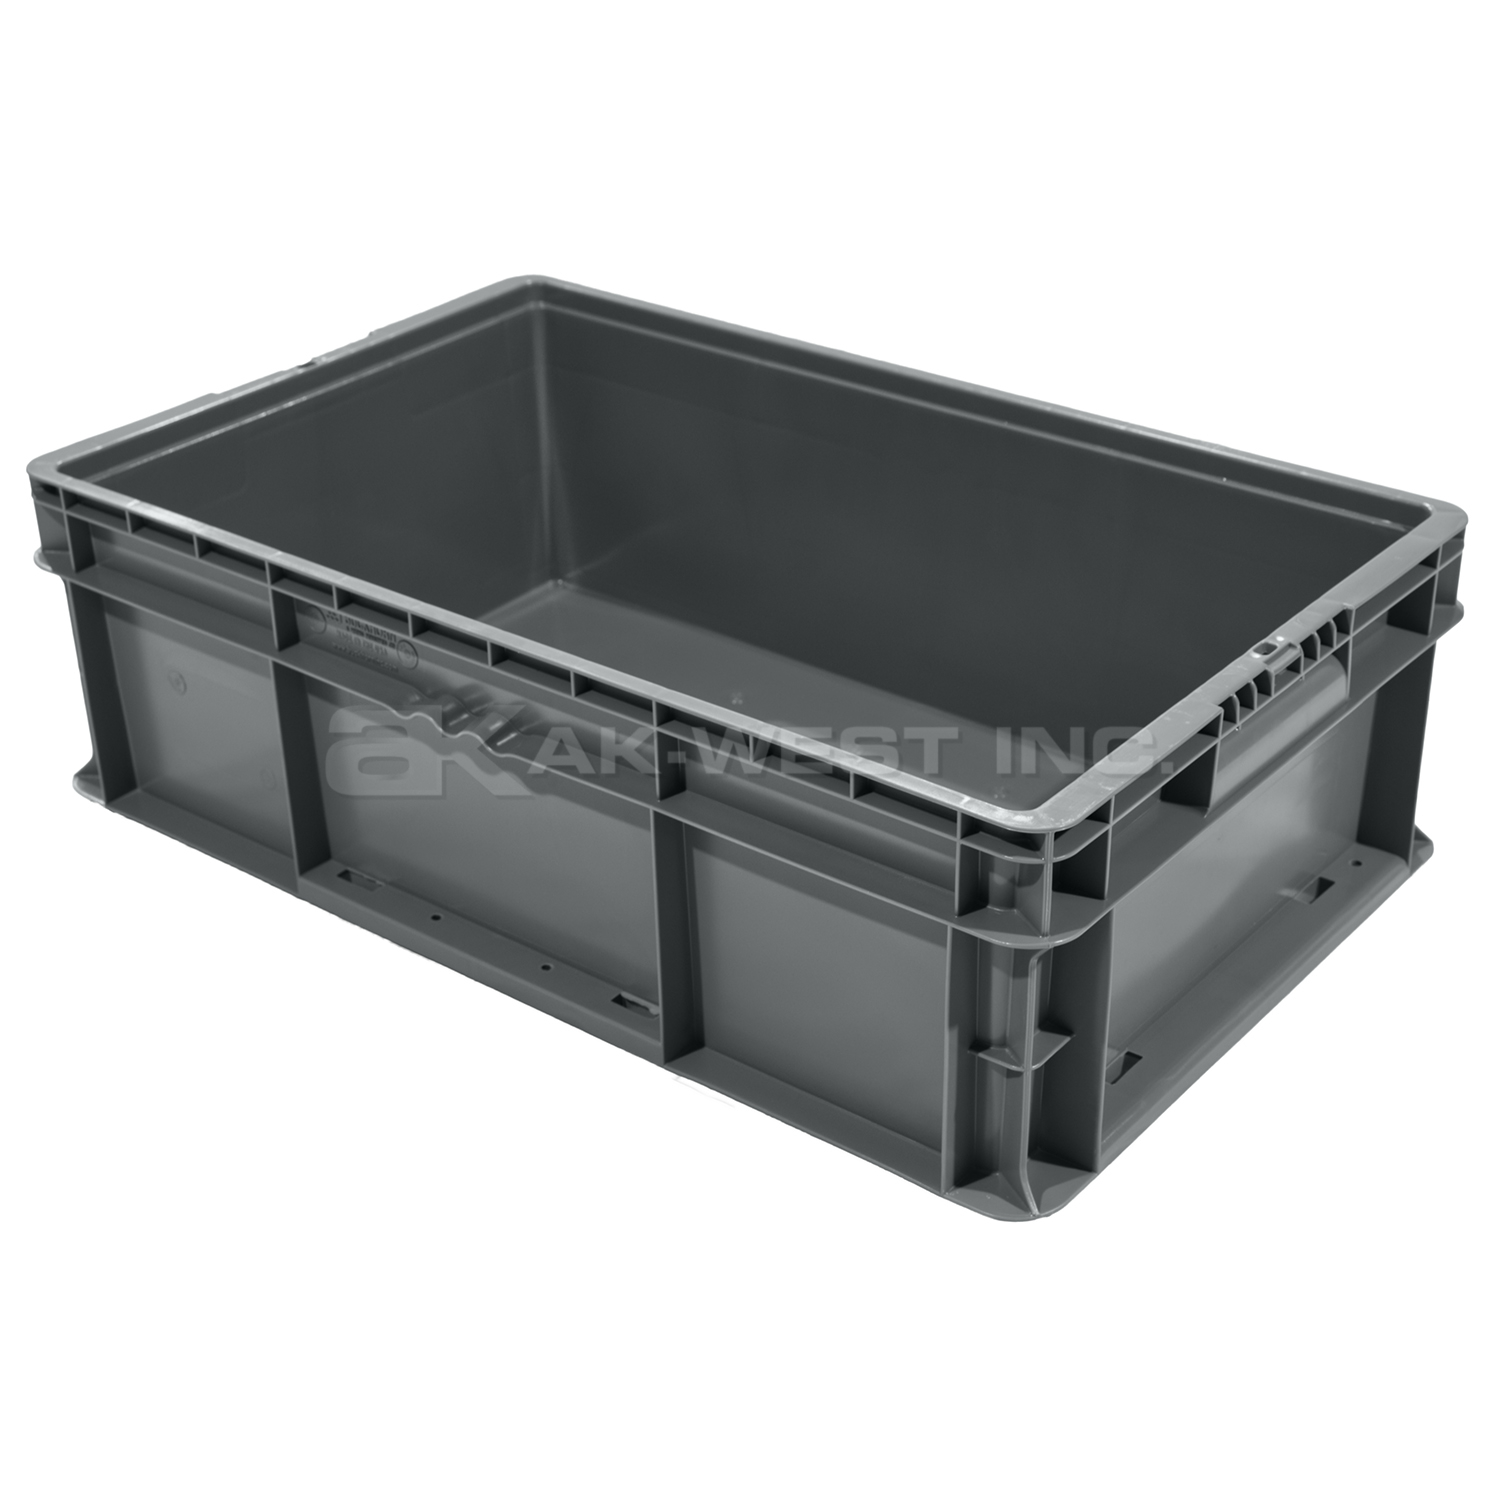 Grey, 24" x 15" x 7", Straight Wall Container